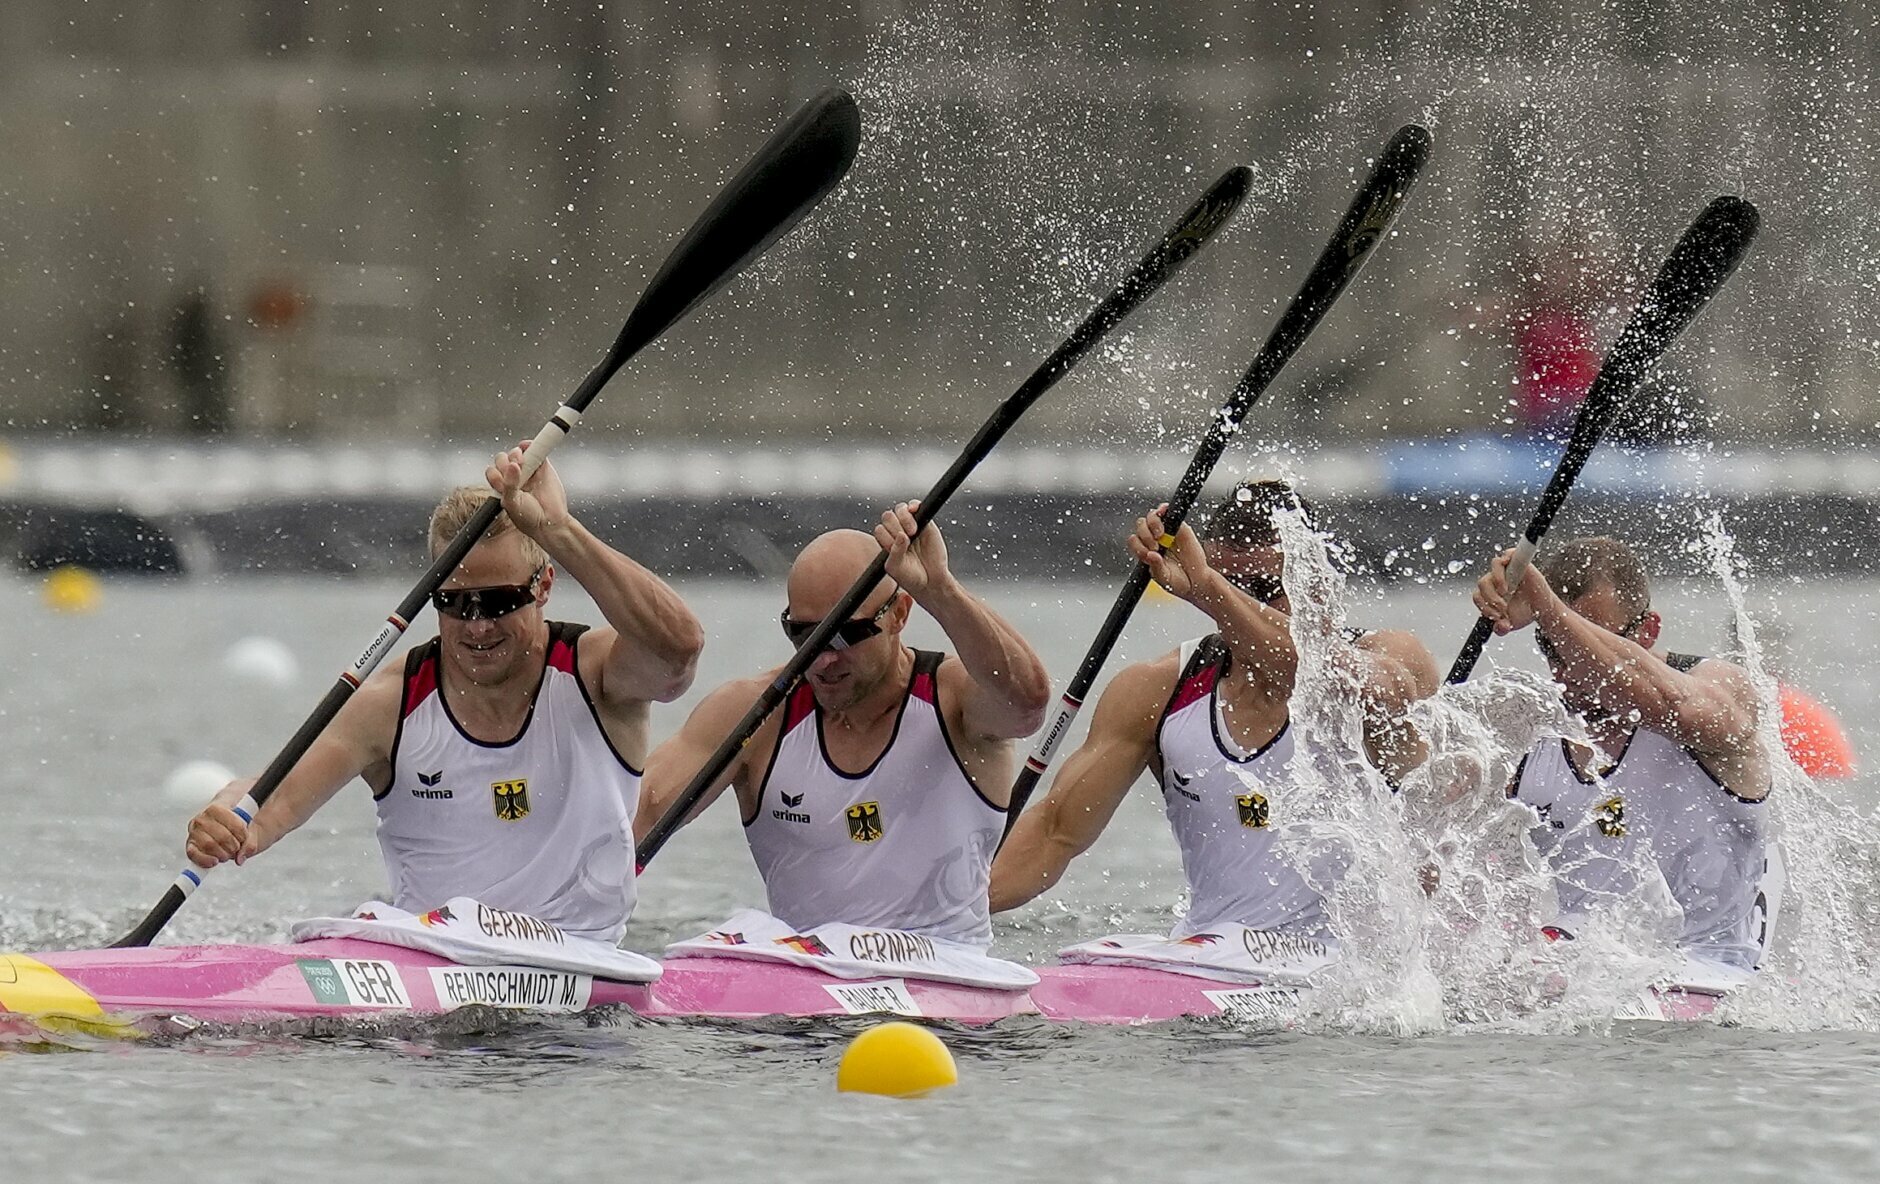 Max Rendschmidt, Ronald Rauhe, Tom Liebscher and Max Lemke of Germany compete in the men's kayak four 500m semifinal at the 2020 Summer Olympics, Saturday, Aug. 7, 2021, in Tokyo, Japan. (AP Photo/Kirsty Wigglesworth)